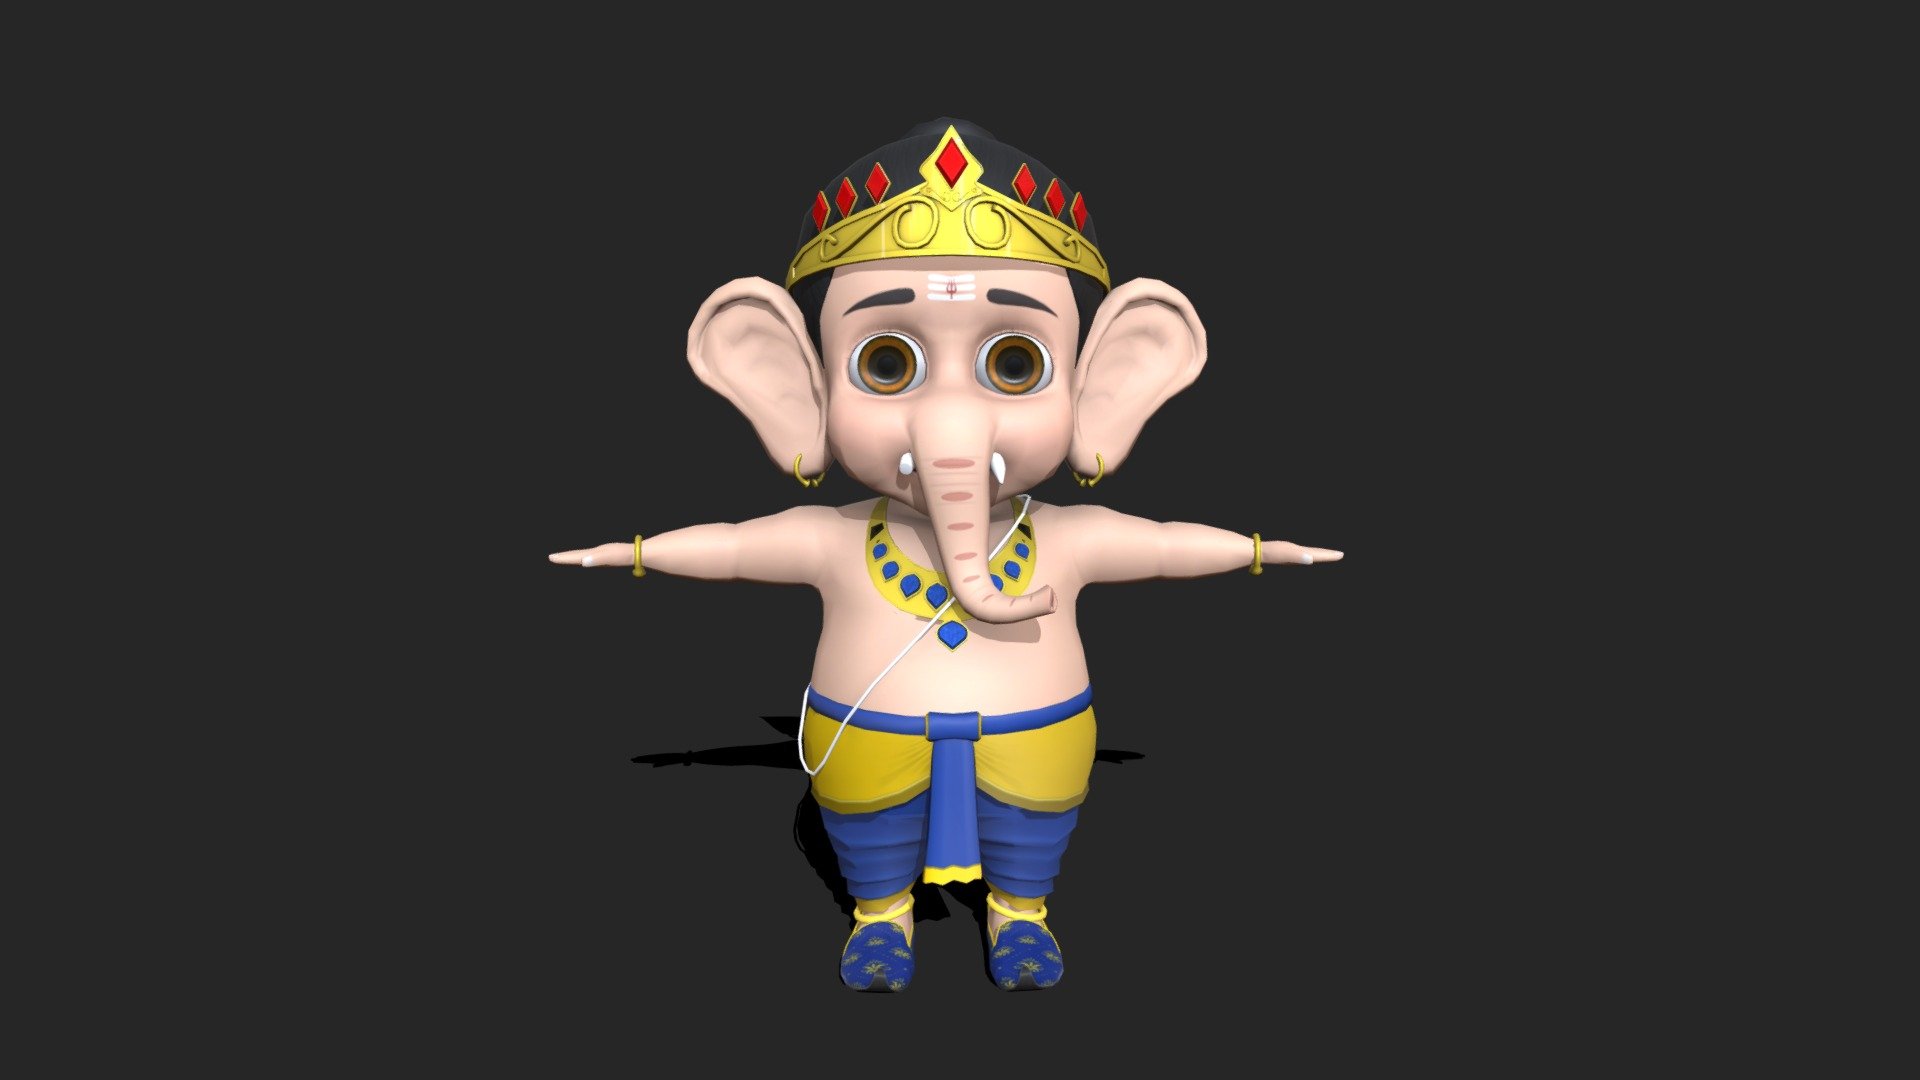 Game Ready, High-Quality Model of Bal Ganesh.

Features :-





Completely Unwrapped Ganesh Character &amp; his friend the Mouse




Rigged &amp; mecanim ready model.




Clean Topology.




Consists of High Quality and Detailed Textures.




All Materials Assigned Properly.



Pack Contains :-

MODELS :





Bal Ganesh: Packed with 1 Amazing Game ready Bal Ganesh model.




Removable Shoes.



TEXTURES :





4 Textures.




All Textures with 2048 X 2048 Resolution.



TRI COUNT :

Ganesh: 18581

Character can be  Animated using Mixamo.

We would love to hear your rating and comments.

Support email: tgamesassets@gmail.com - Bal Ganesh - Buy Royalty Free 3D model by TGamesAssets 3d model